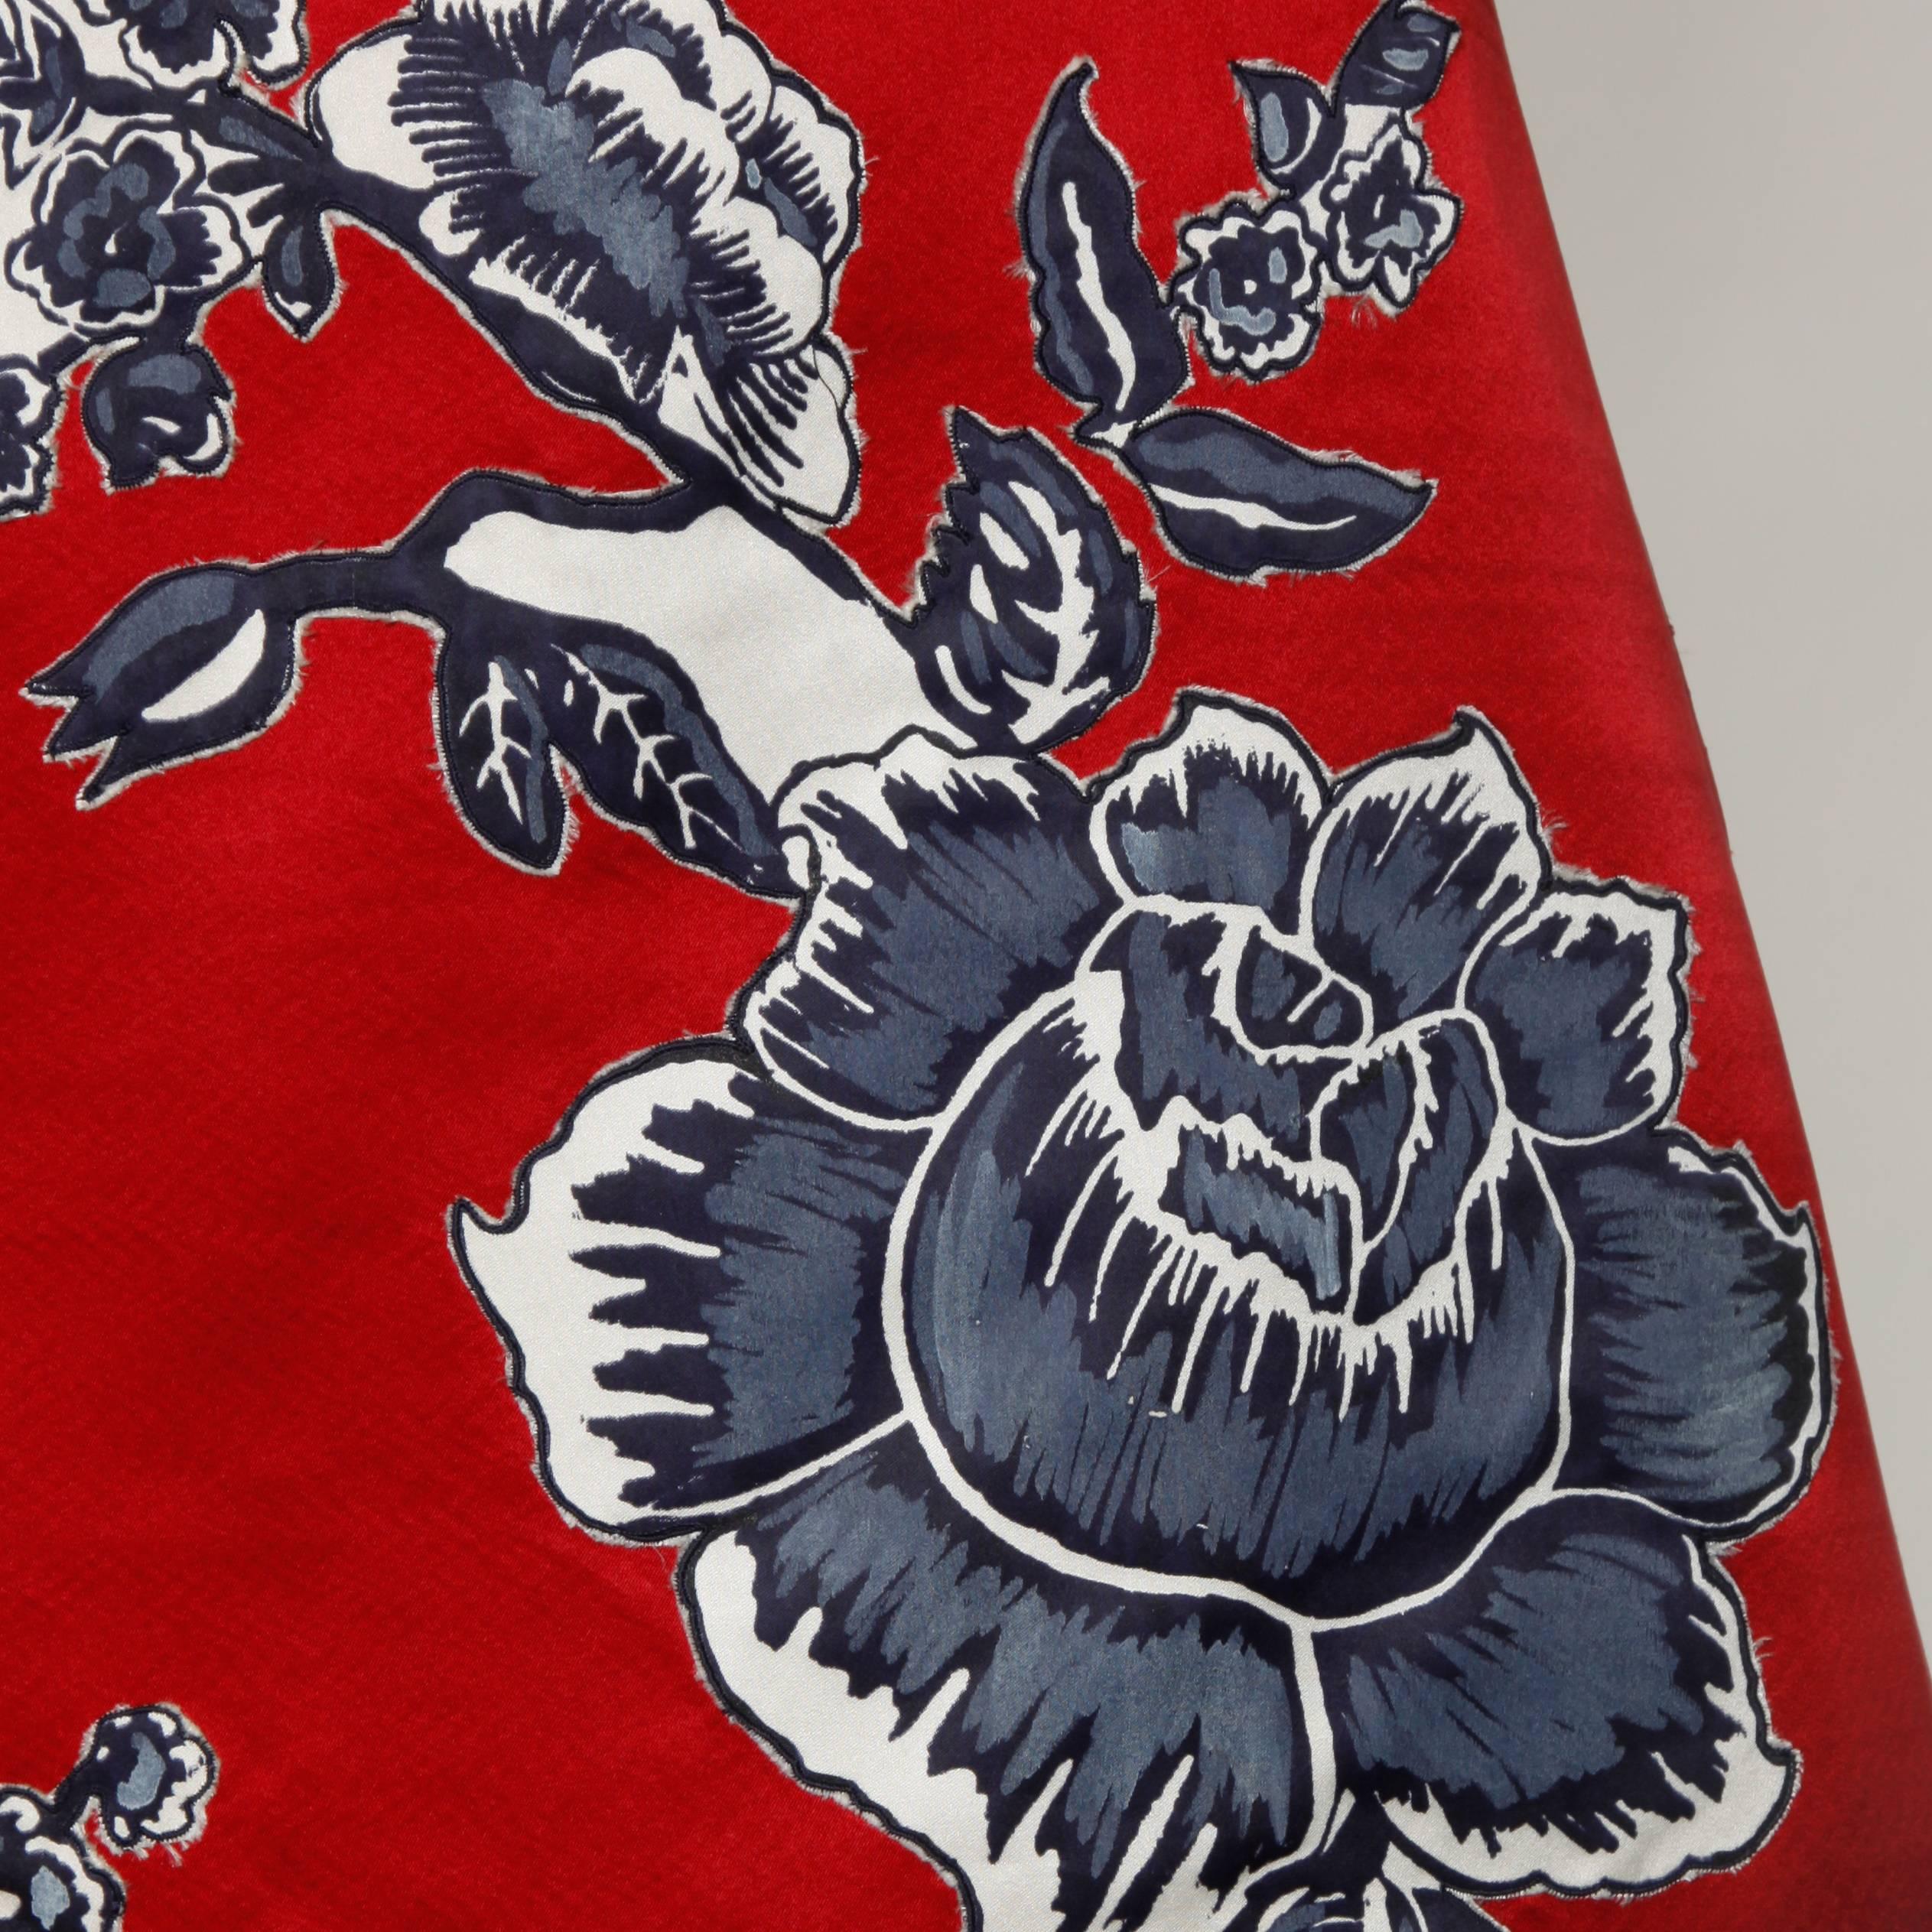 Gorgeous vintage red satin Bill Blass skirt with black, white and gray printed flowers.

Details:

Fully Lined
Side Zip and Hook Closure
Marked Size: Not Marked
Estimated Size: Large
Color: Iridescent Gray Blue, Ivory and Cadmium